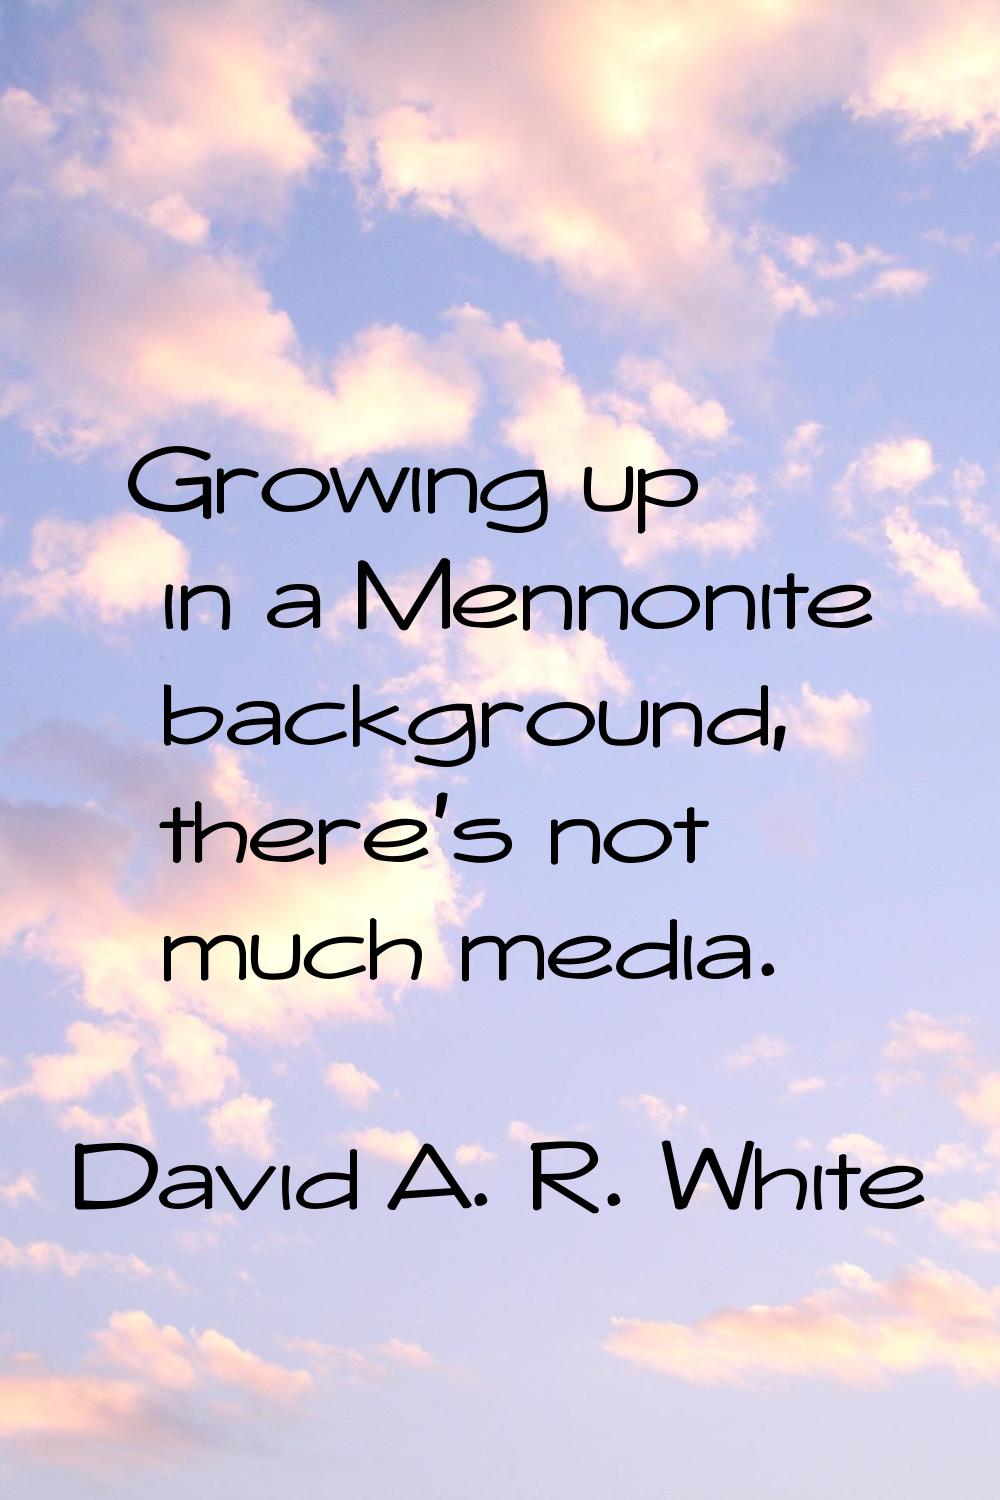 Growing up in a Mennonite background, there's not much media.